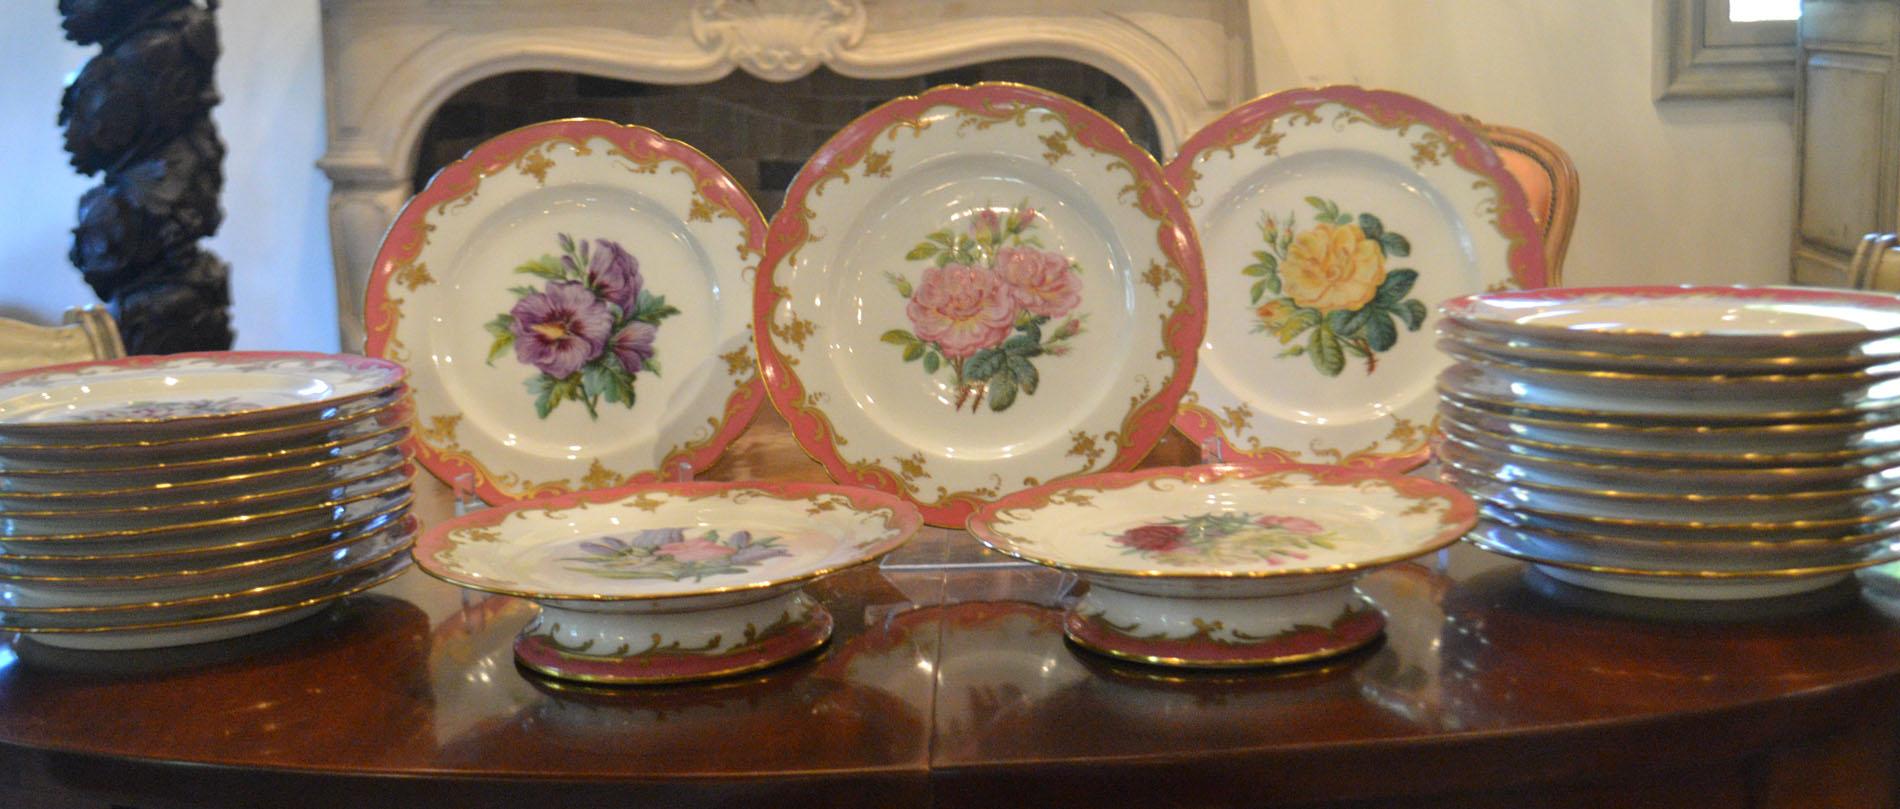 Rare Early 19th Century Paris Botanical Pink Porcelain Service for 24 In Excellent Condition For Sale In Vista, CA